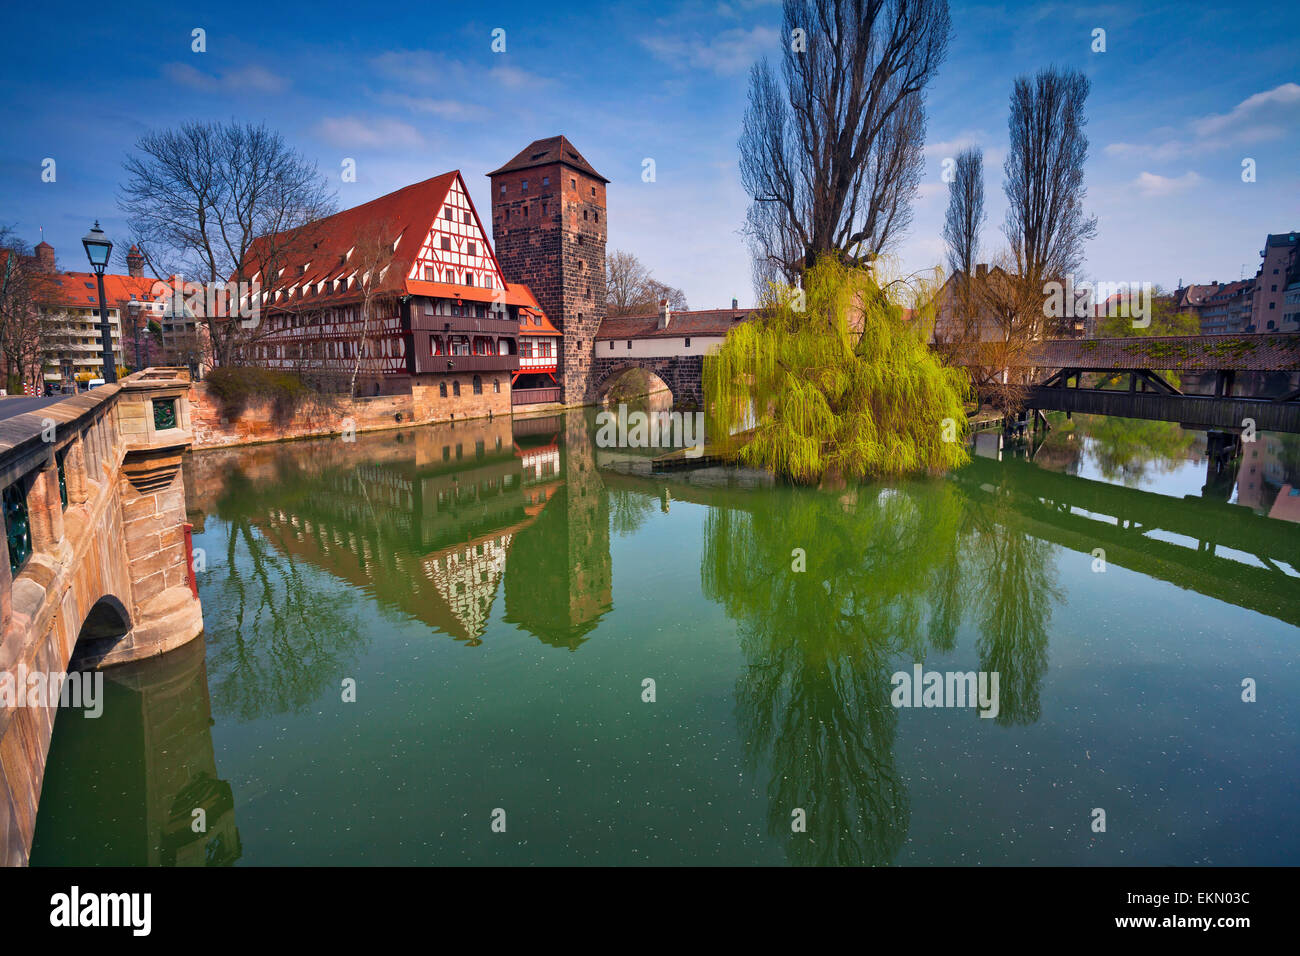 Nuremberg, Germany. Image of the Nuremberg old town during sunny spring day. Stock Photo